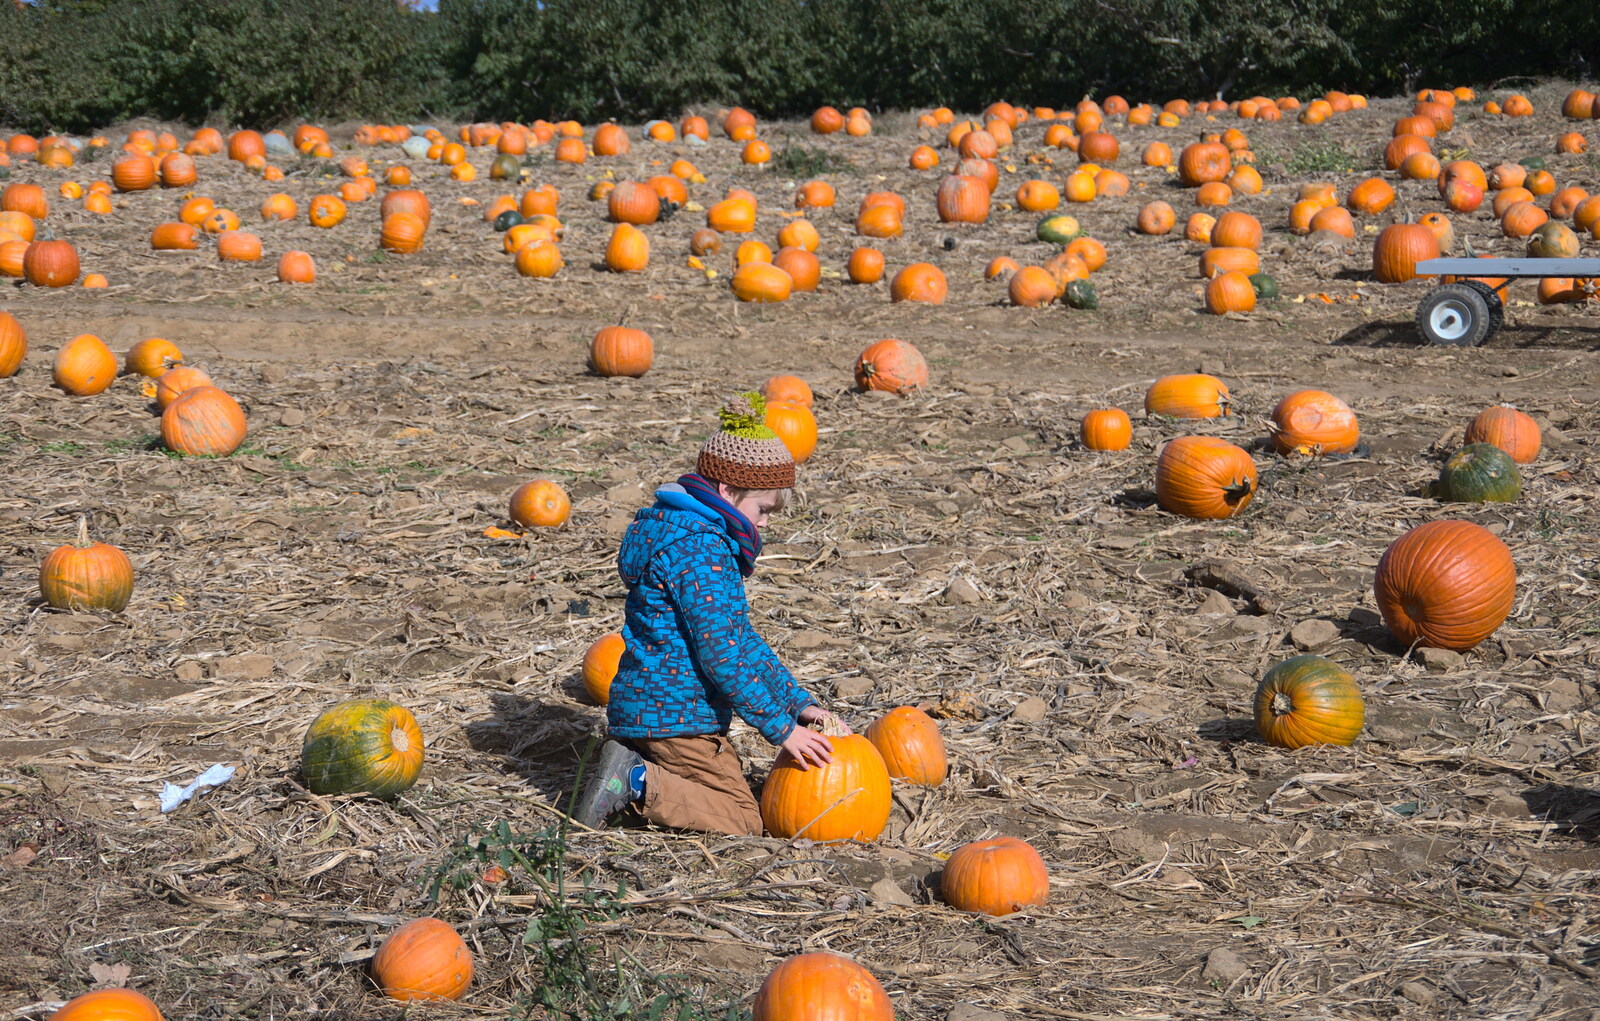 Harry contemplates a big orange vegetable from Pumpkin Picking at Alstede Farm, Chester, Morris County, New Jersey - 24th October 2018